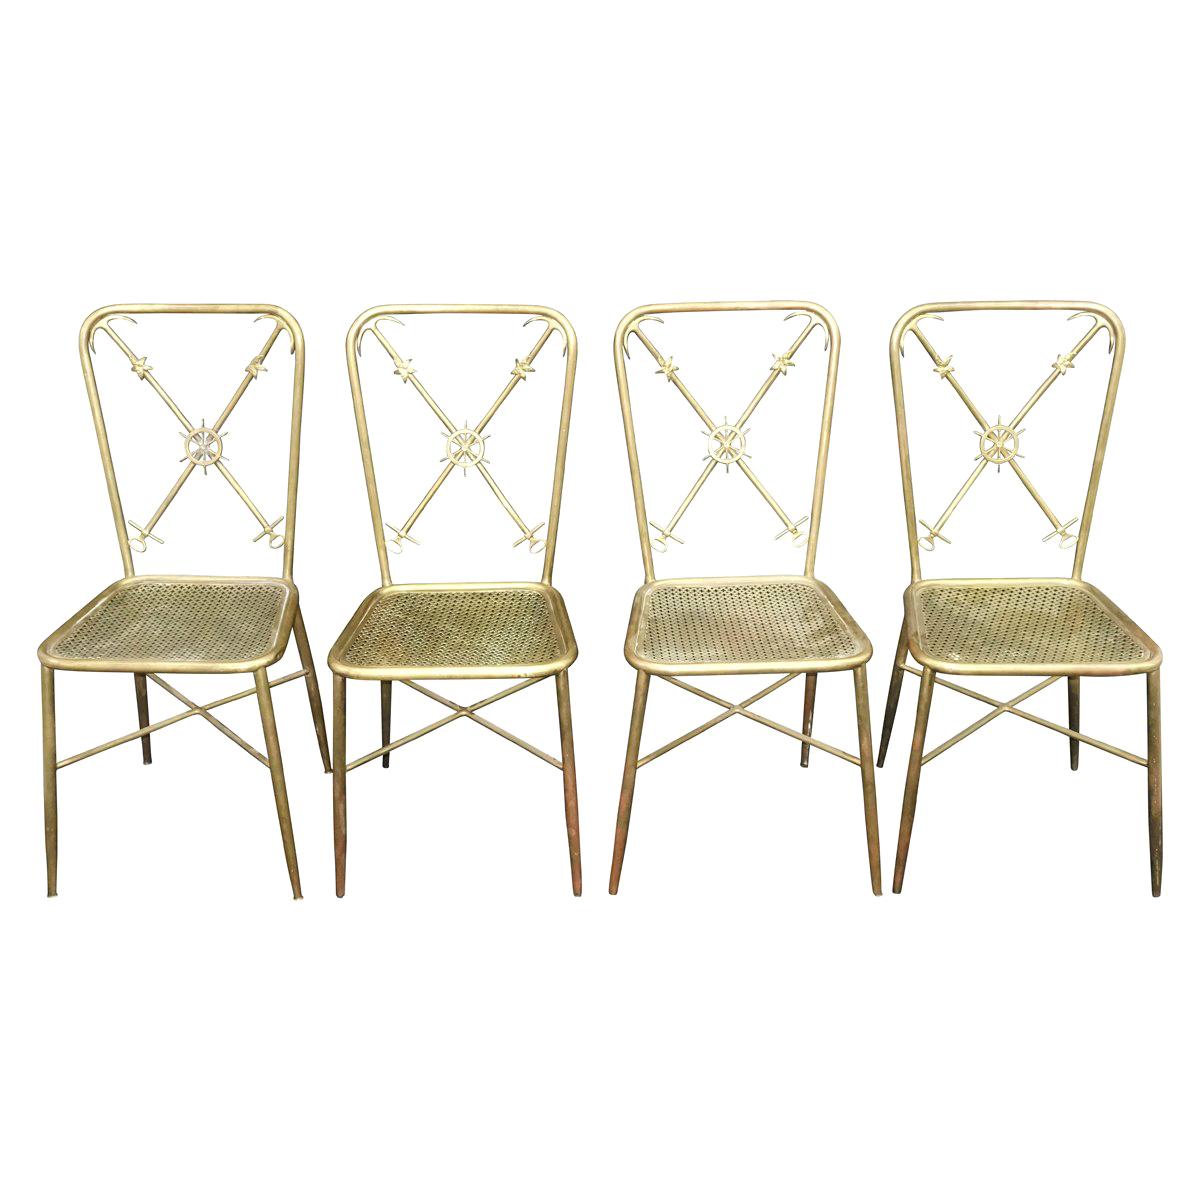 4 Italian Nautical Dining Chairs in the Manner of Gio Ponti